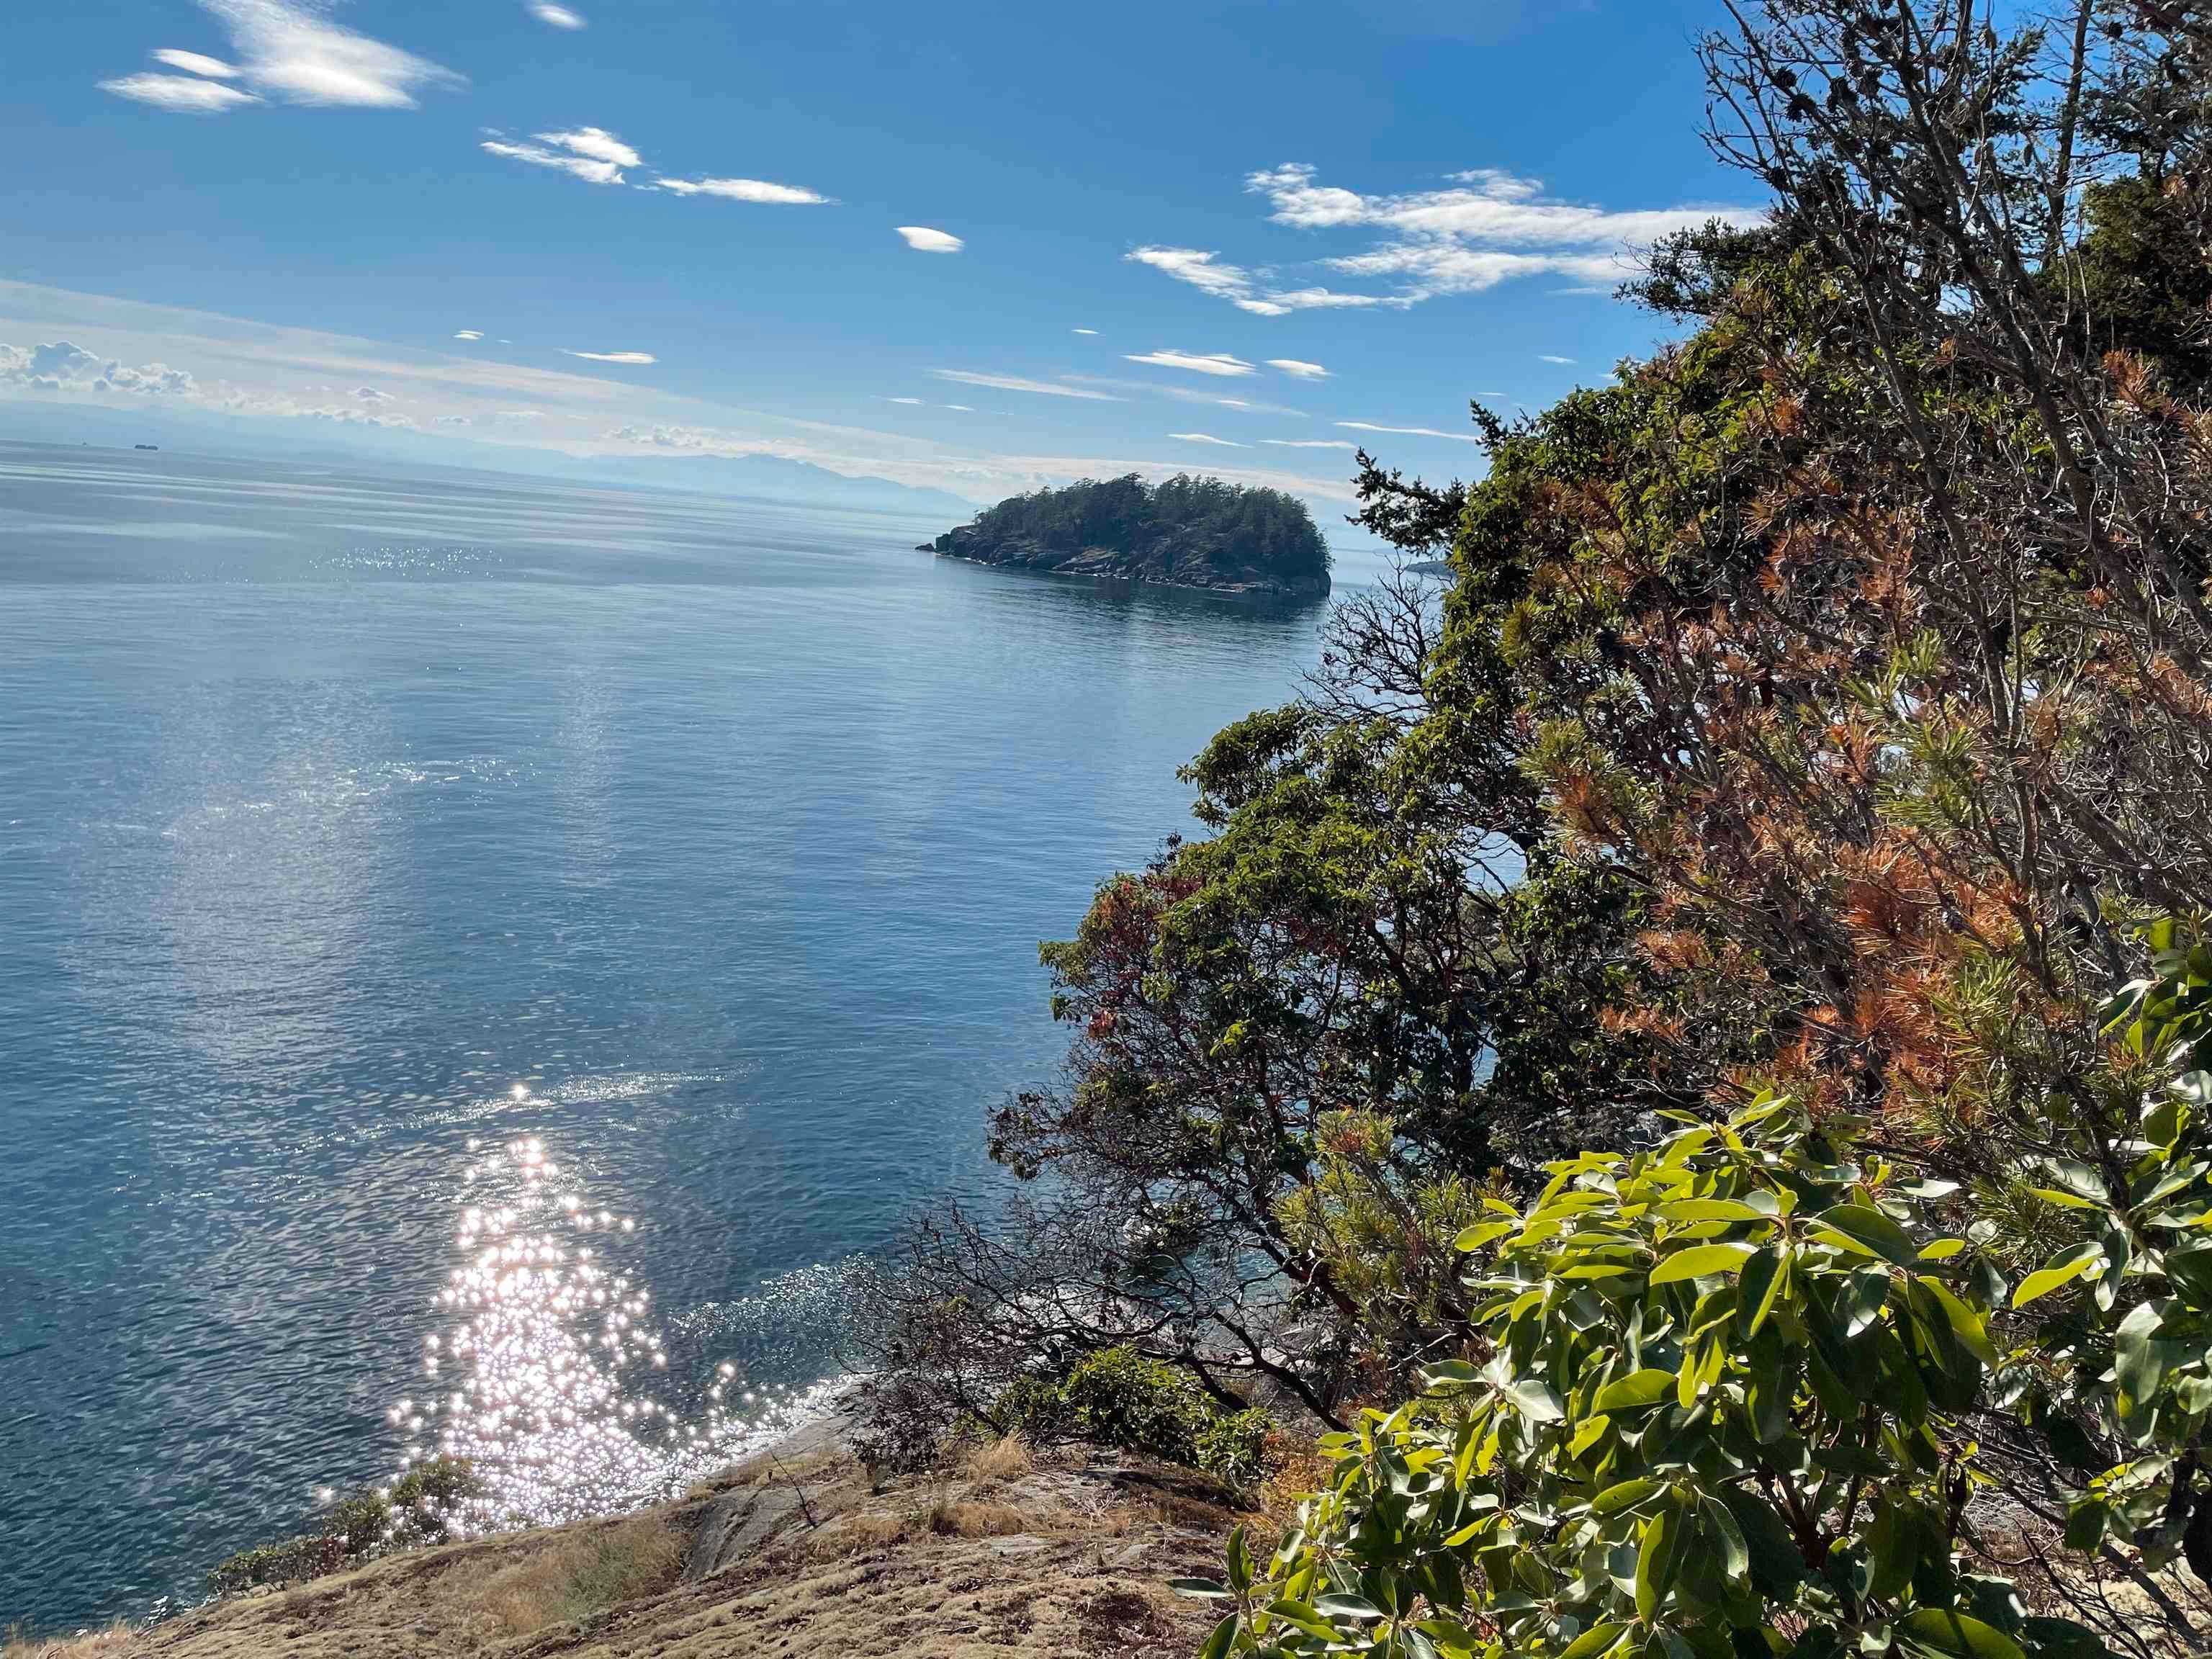 I have sold a property at Lot 8 TRAIL ISLAND in Sechelt
